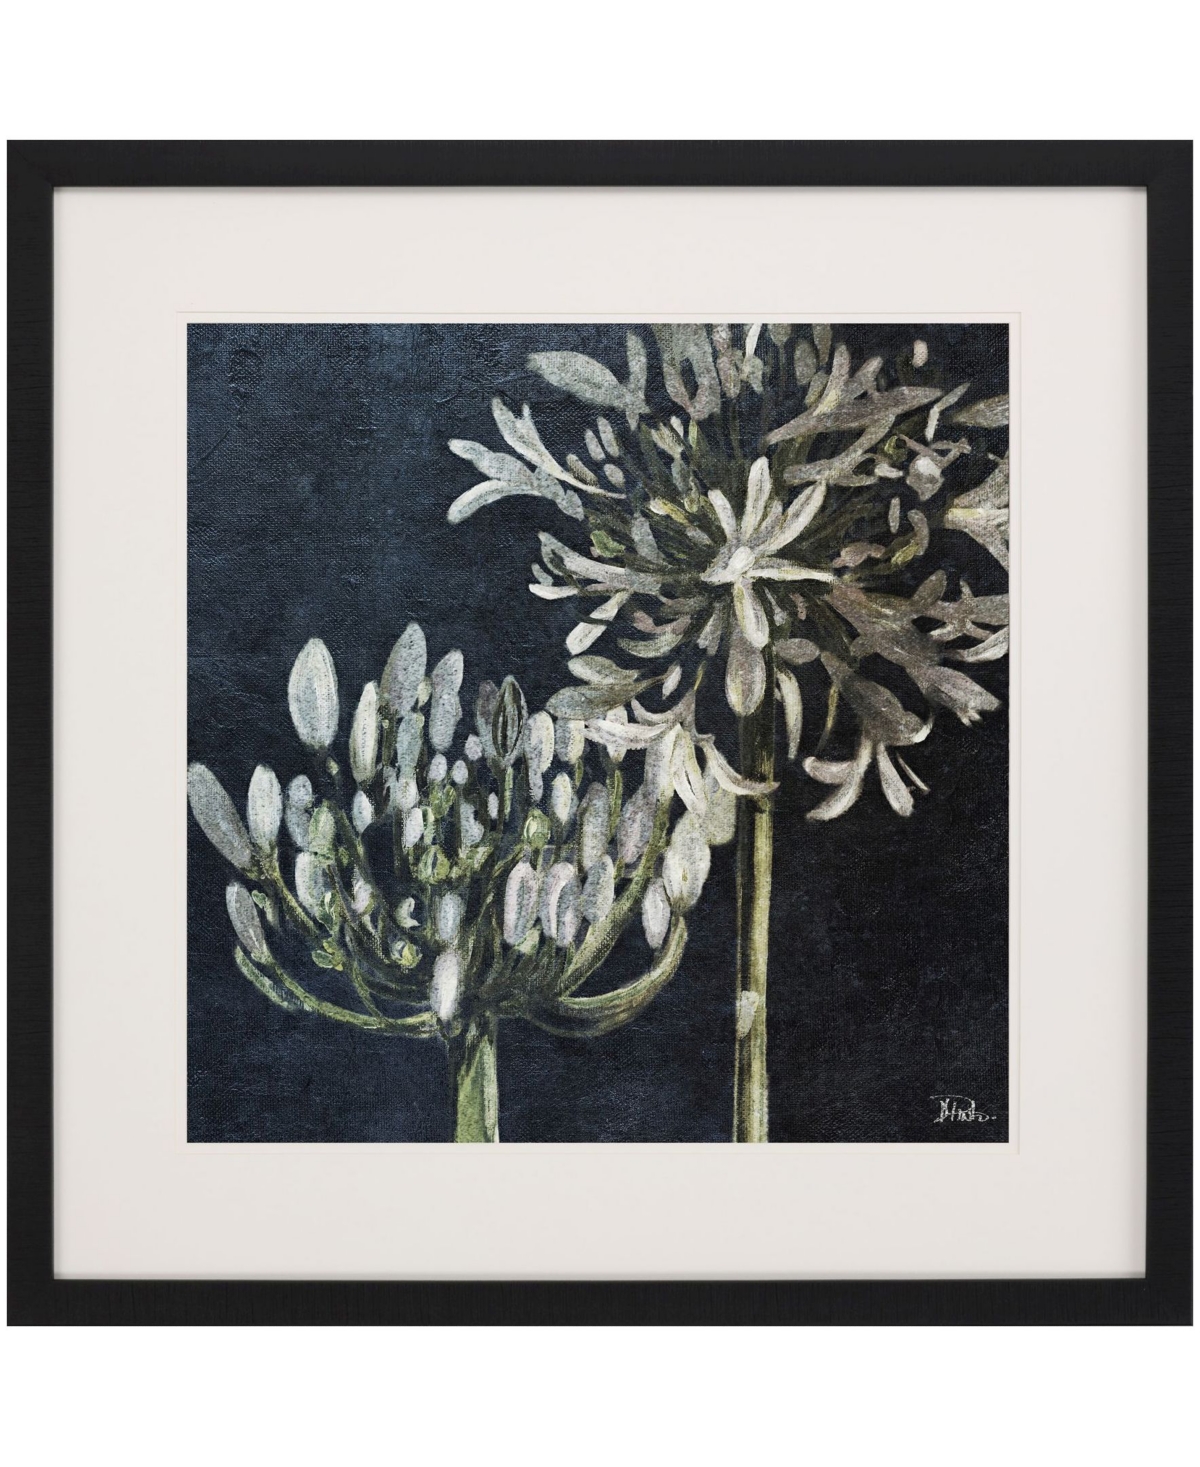 Paragon Picture Gallery Midnight Lilies Ii Framed Art In Black